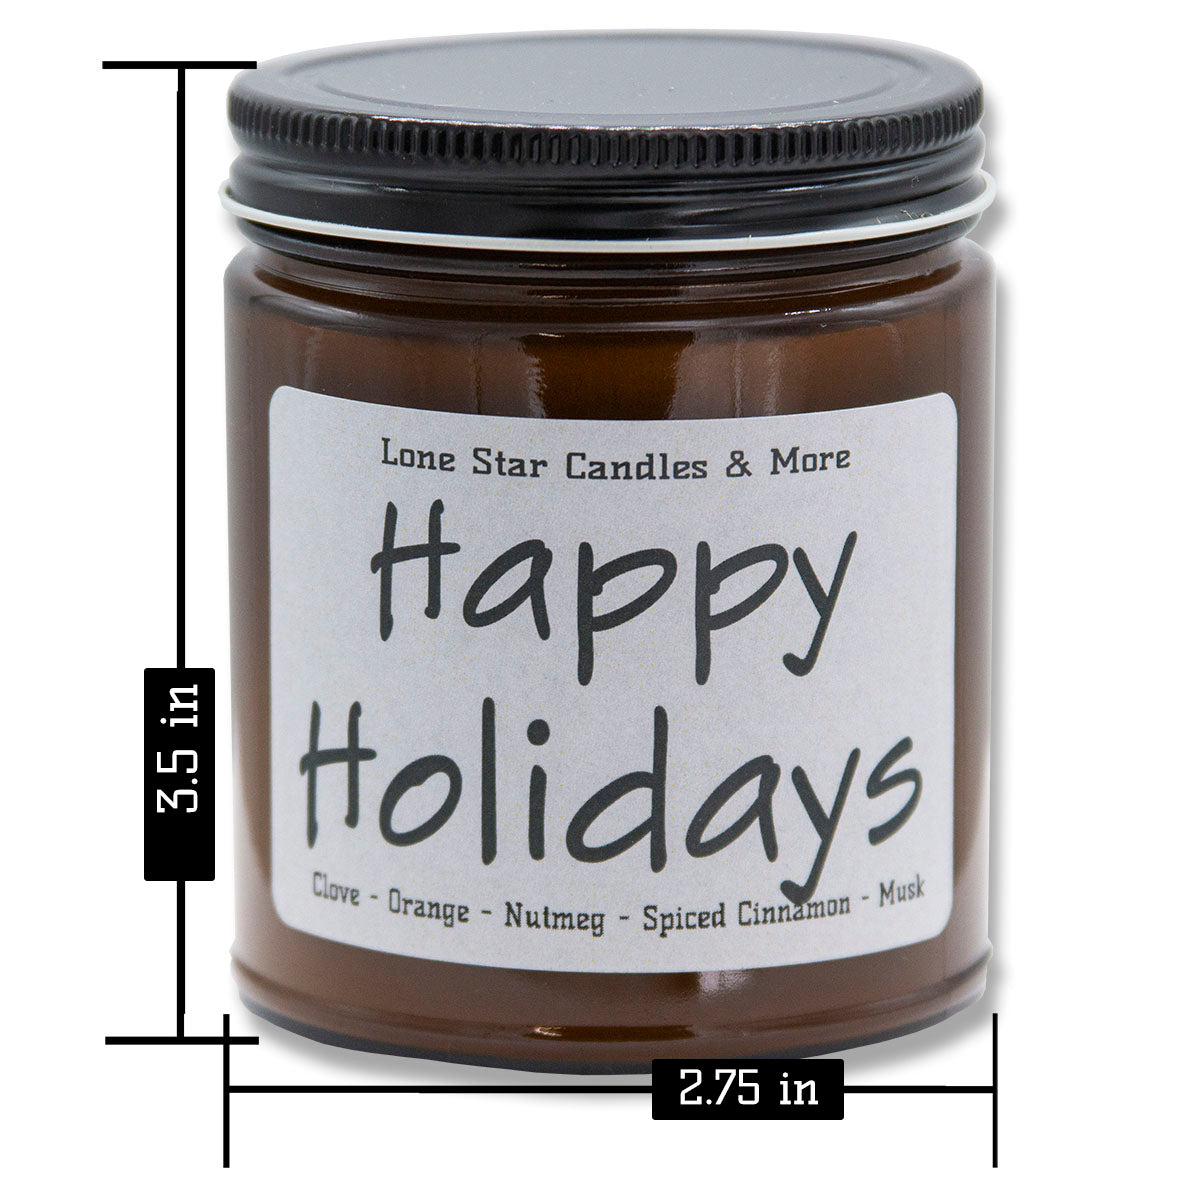 Autumn Cider, Lone Star Candles & More's Premium Hand Poured Strongly Scented Soy Wax Gift Candle, Fall Spices, Sweet Musk, & A Hint of Pineapple, US Made in Texas, Amber Glass Jar 9oz Happy Holidays